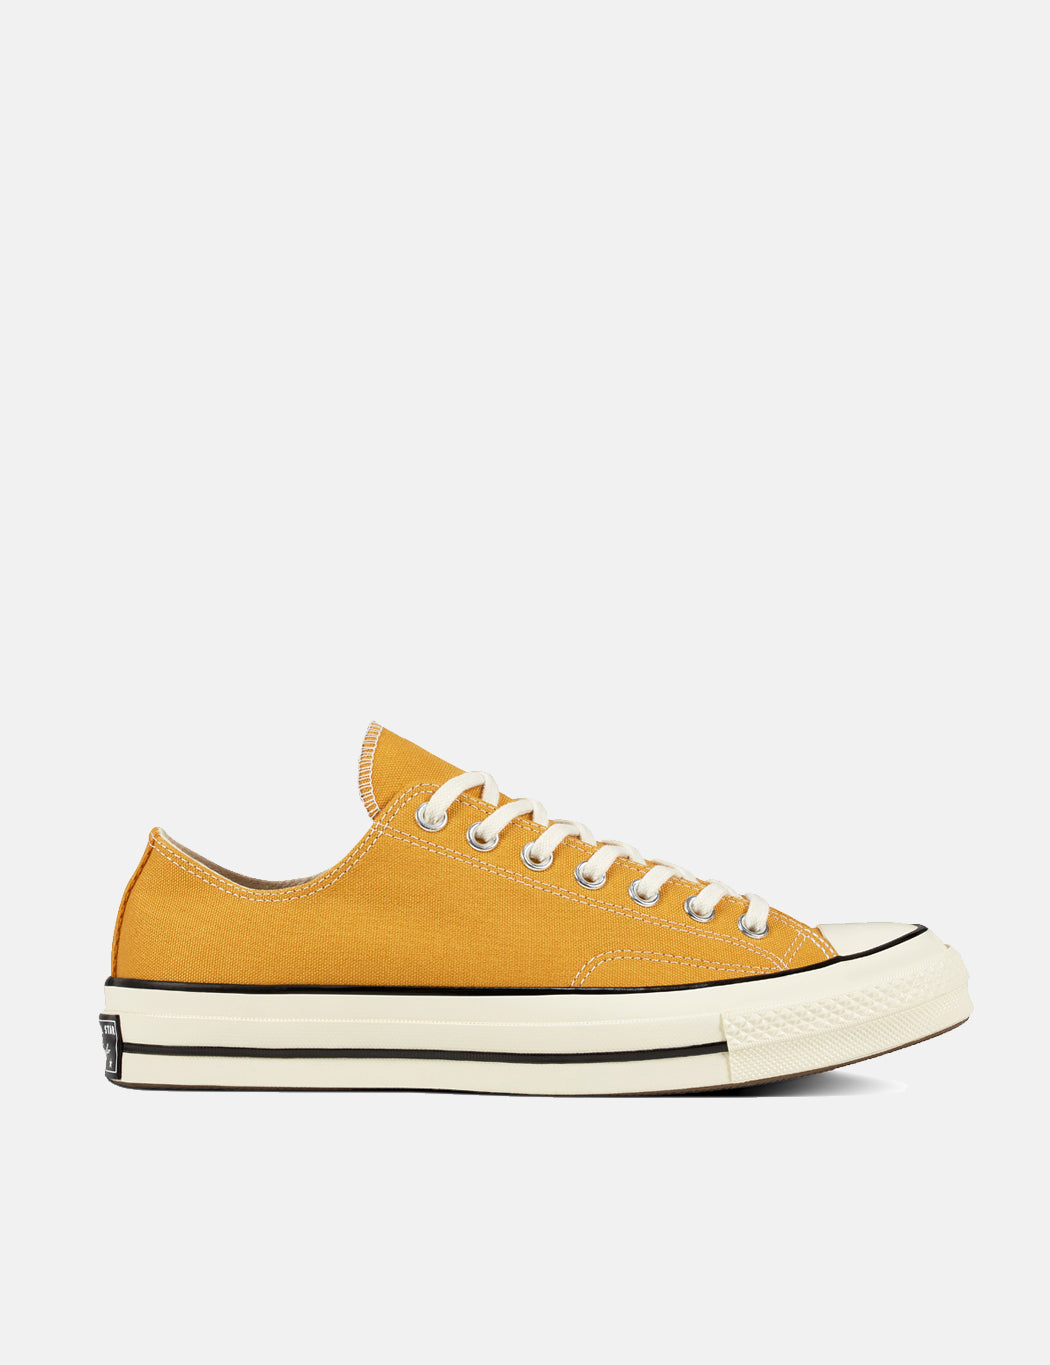 converse 1970s yellow low